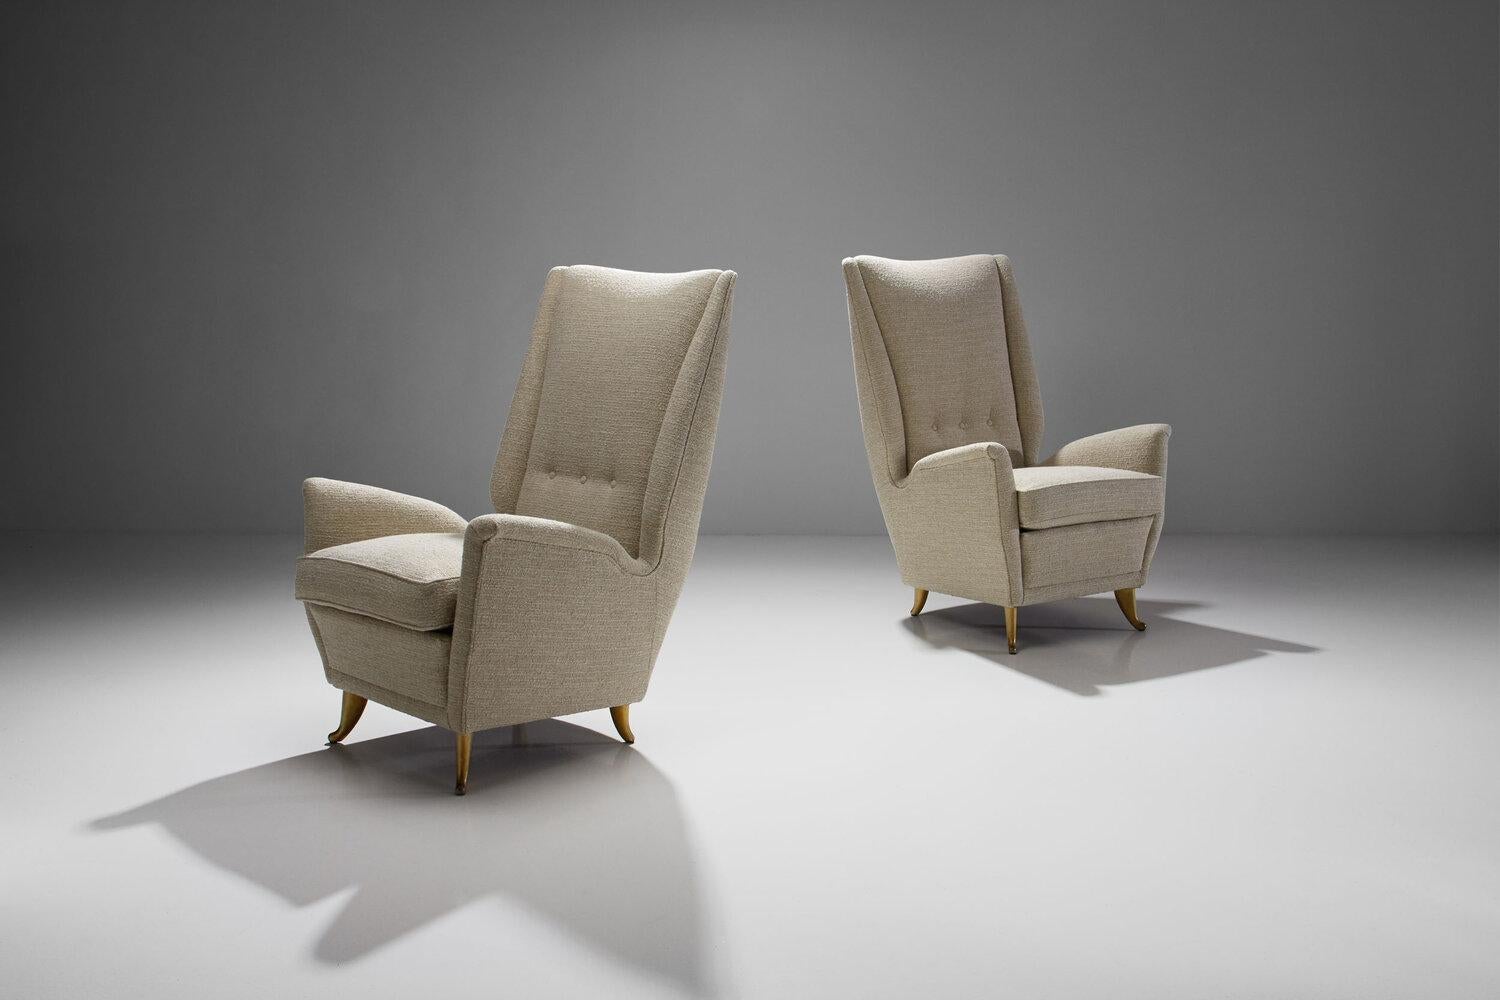 Mid-Century Modern Pair of Lounge Chairs Attributed to Gio Ponti for ISA Bergamo, Italy, 1950s